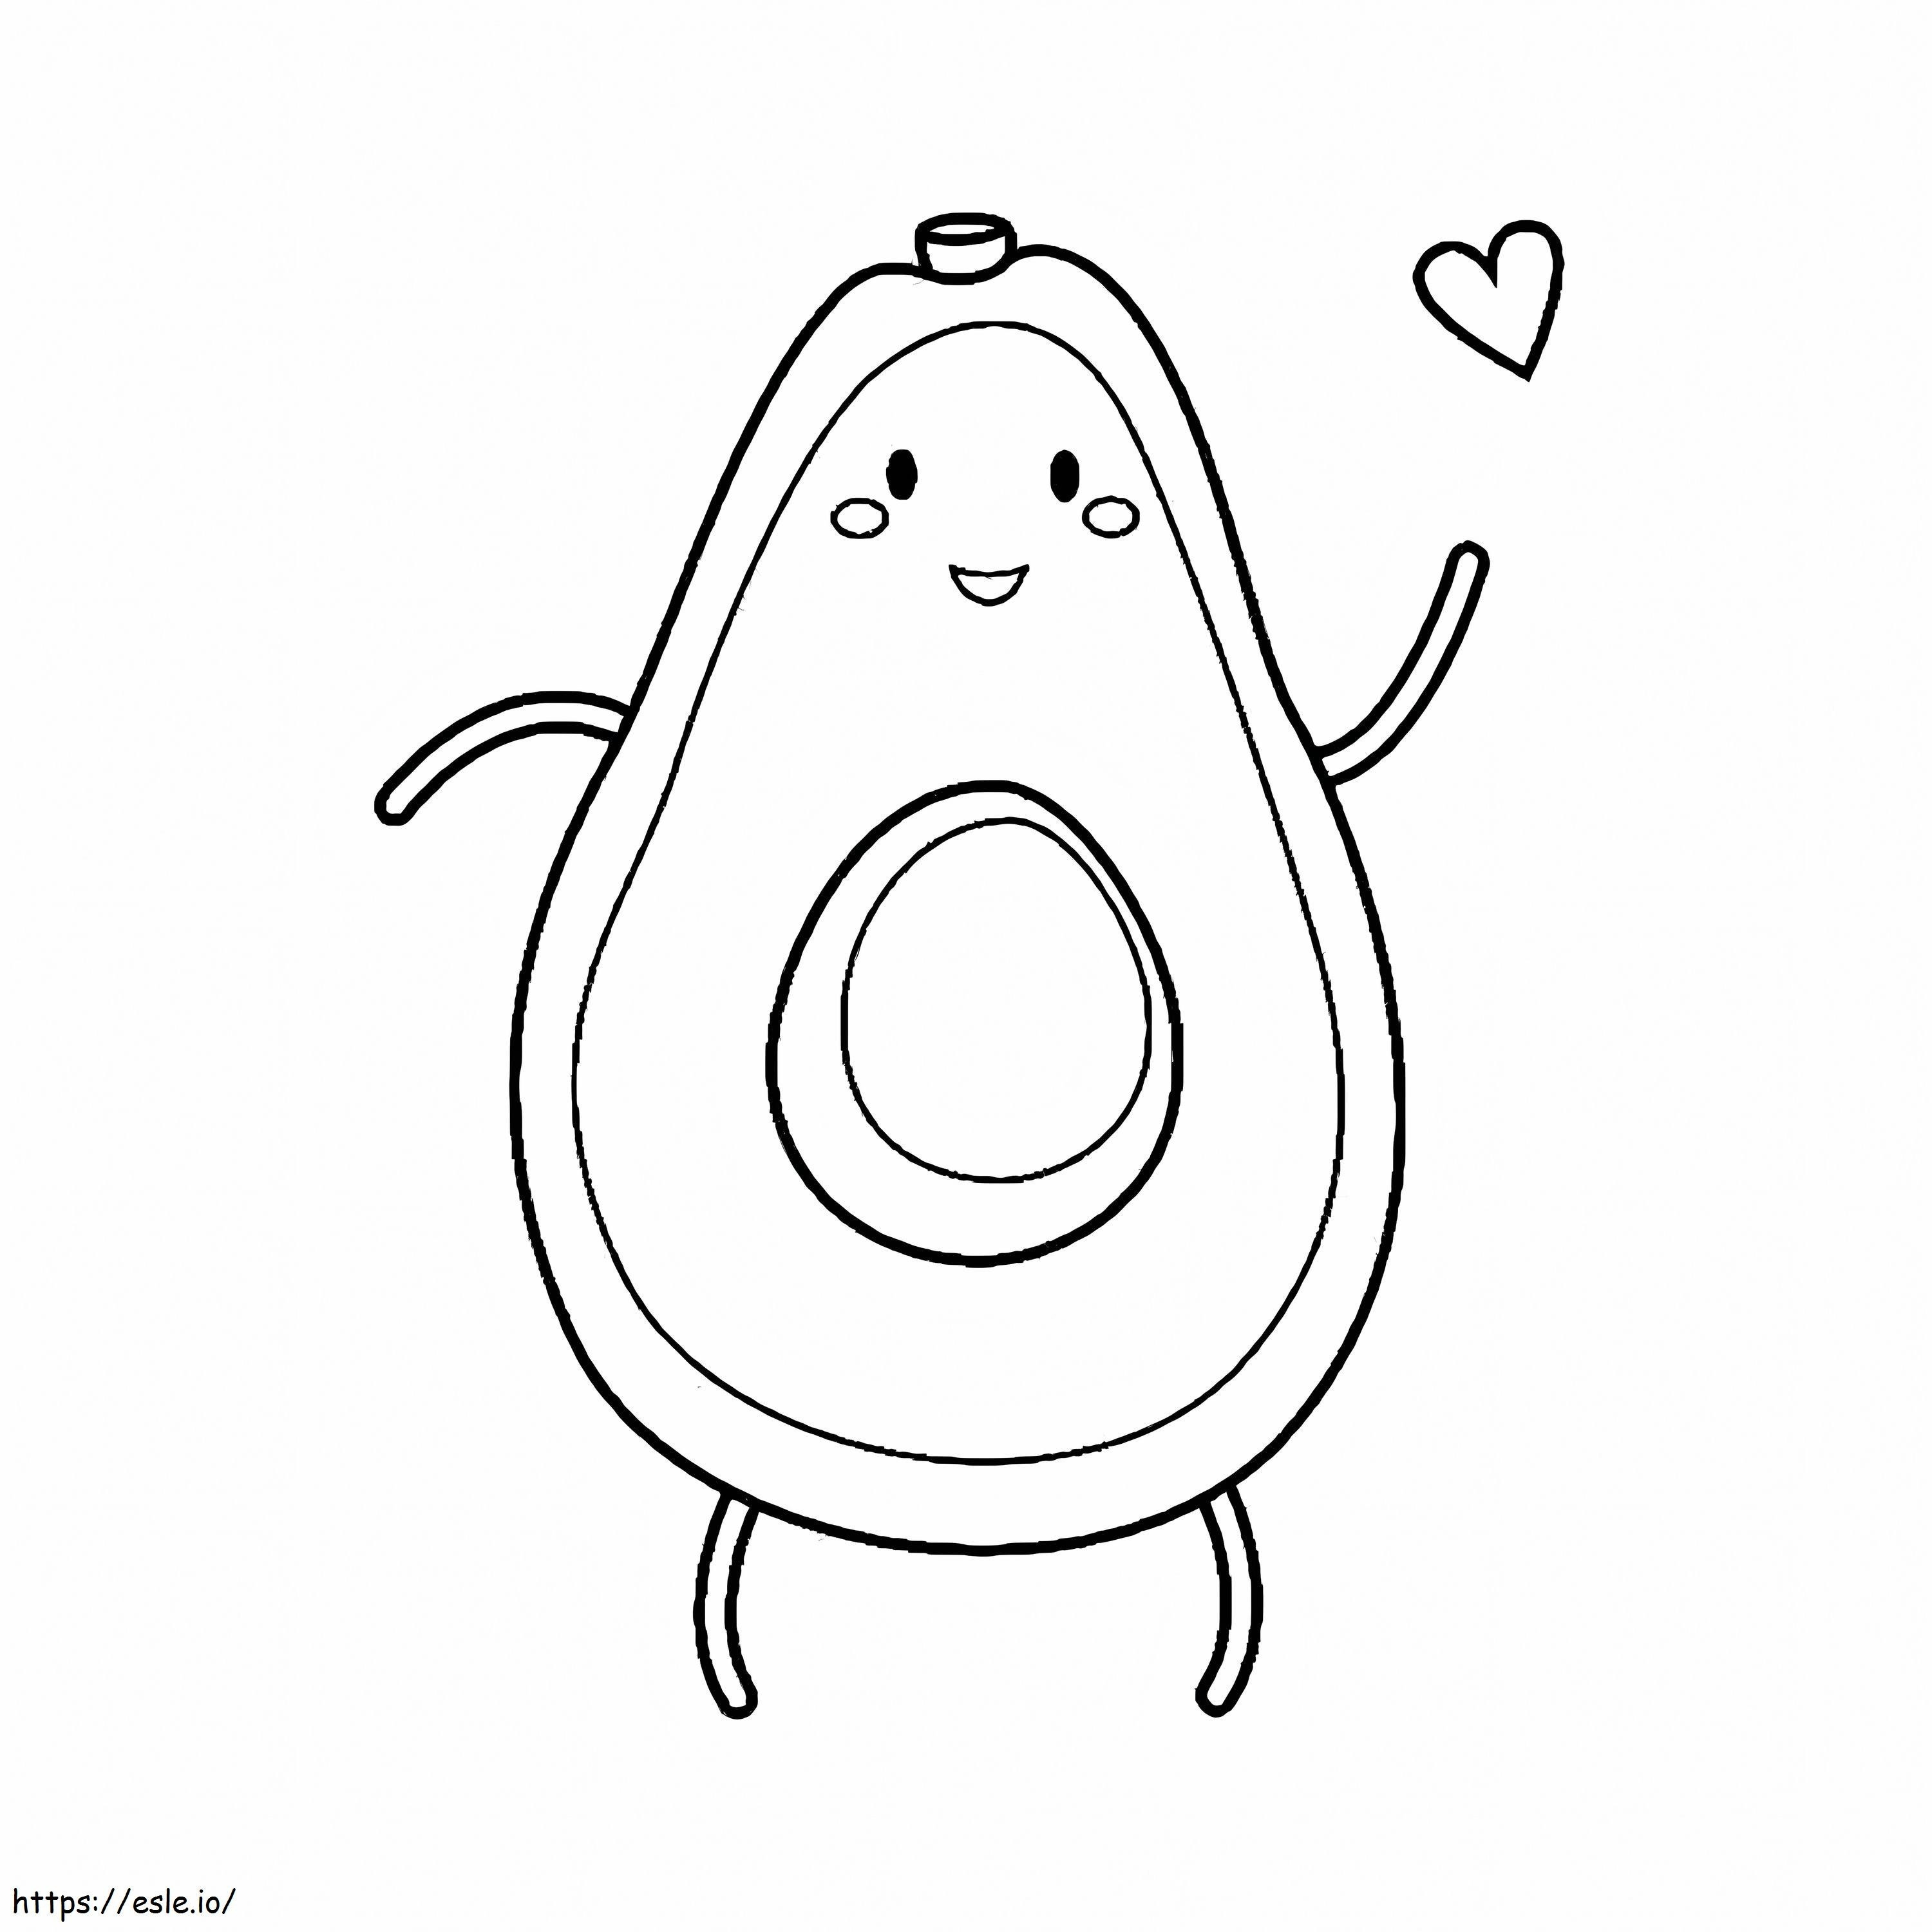 Avocado With Small Eyes coloring page